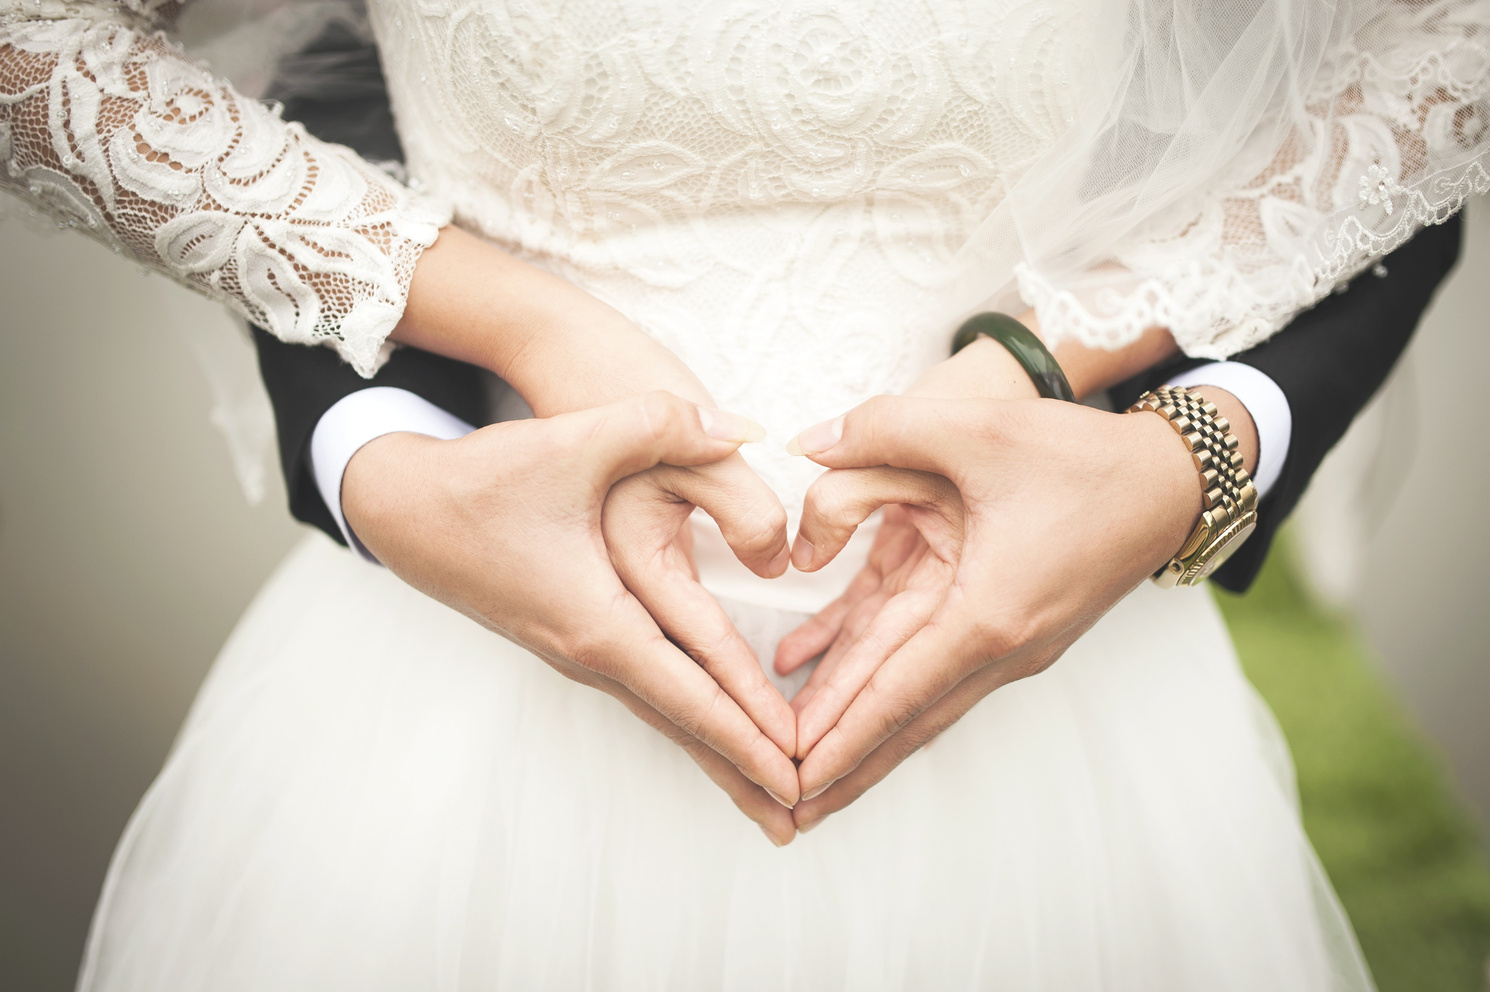 Newlywed Couple's Hands